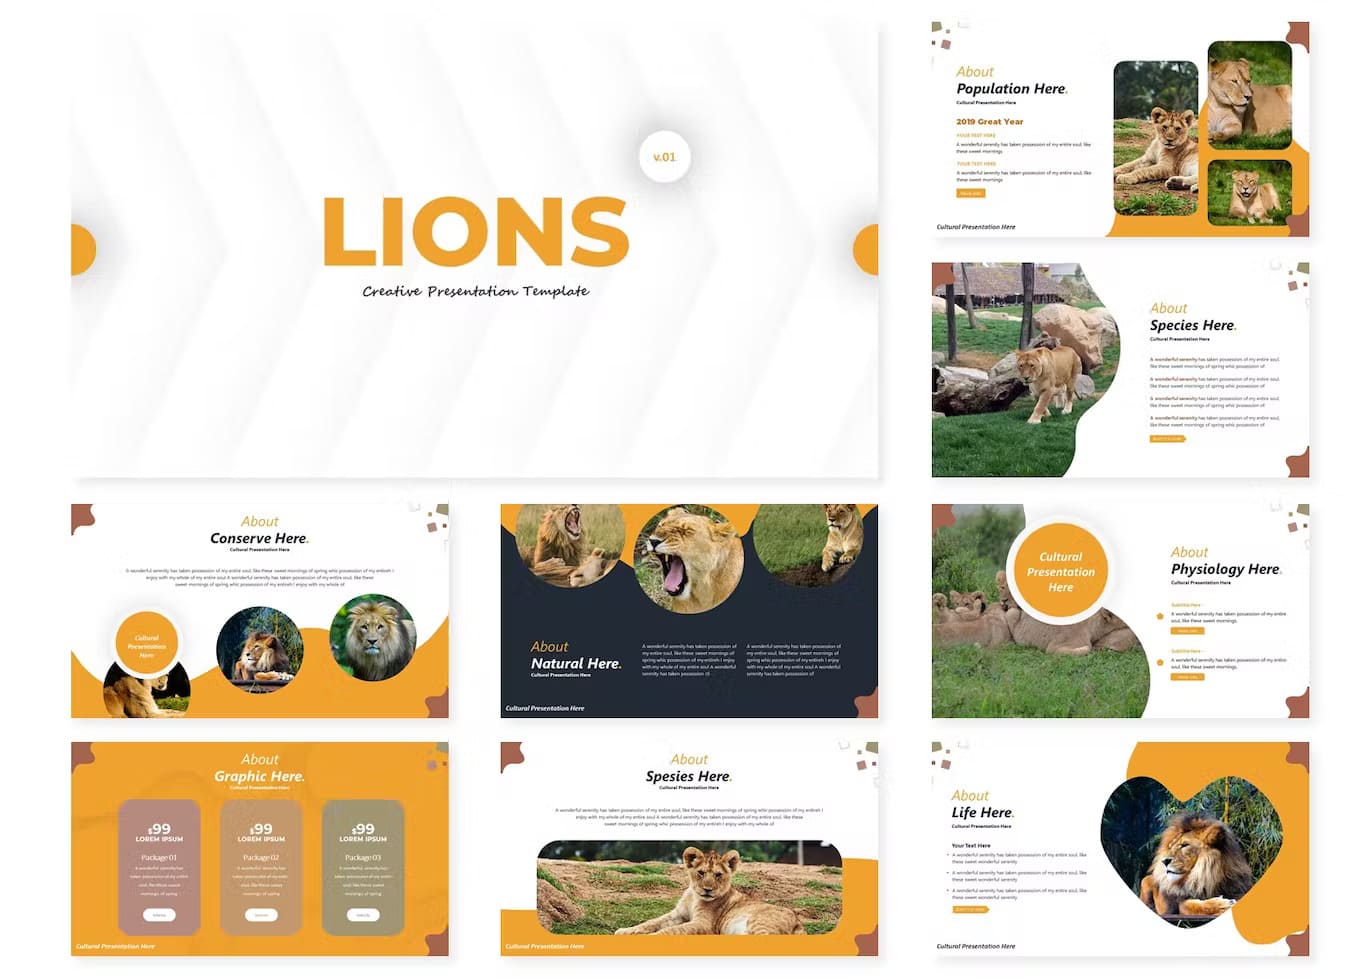 Lions life on the creative presentation template.